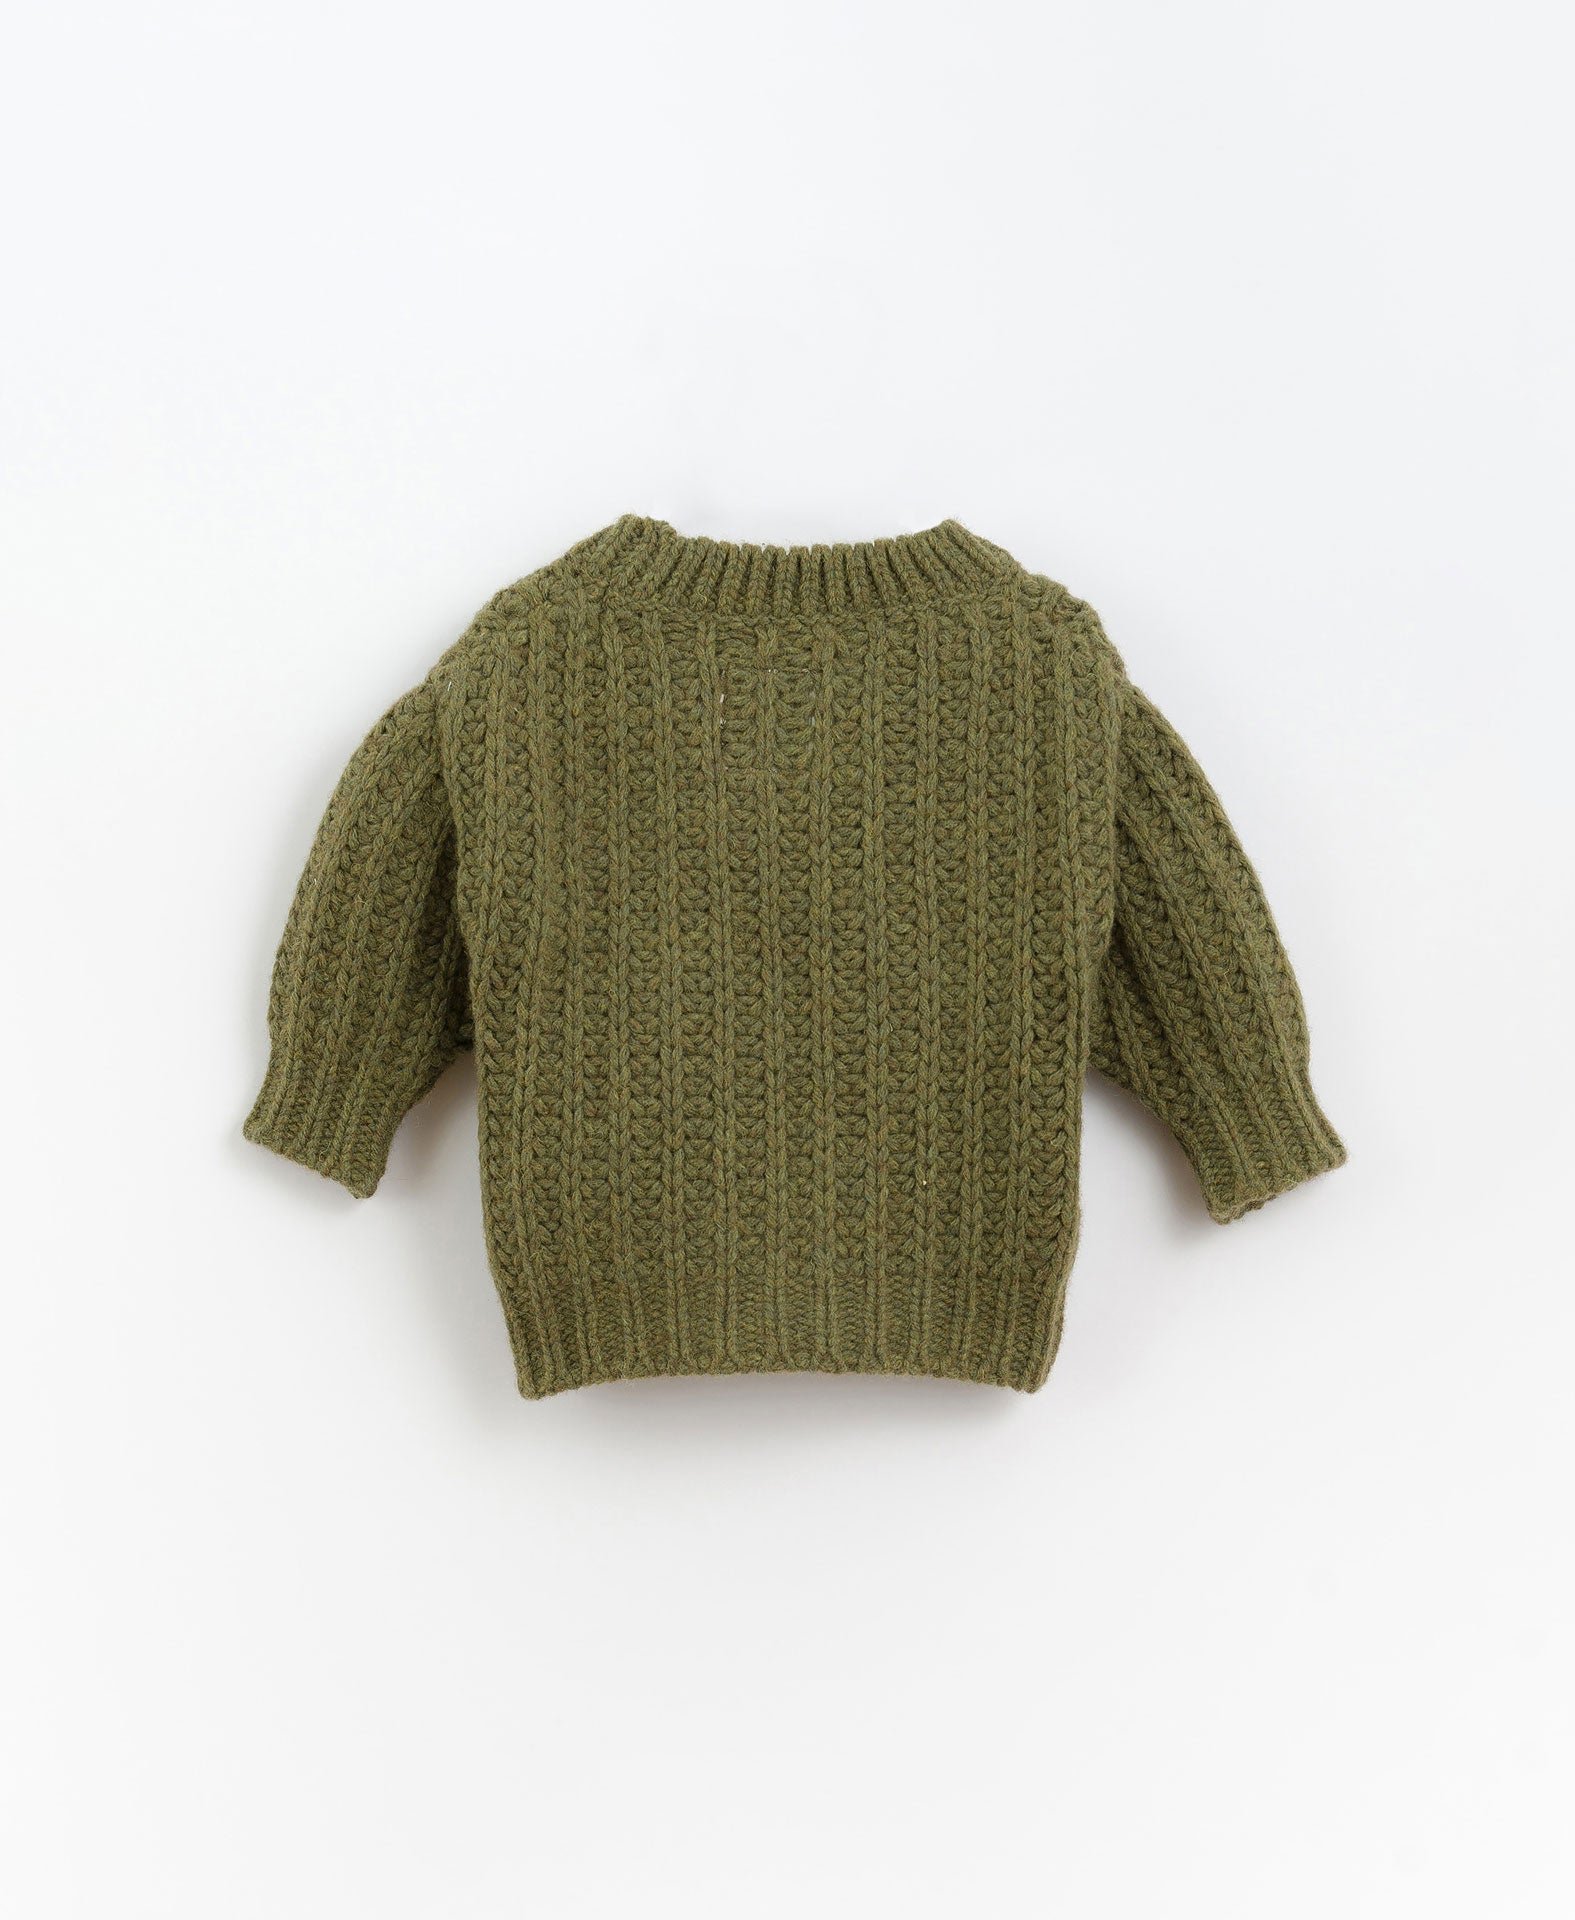 Knitted Sweater - Pea